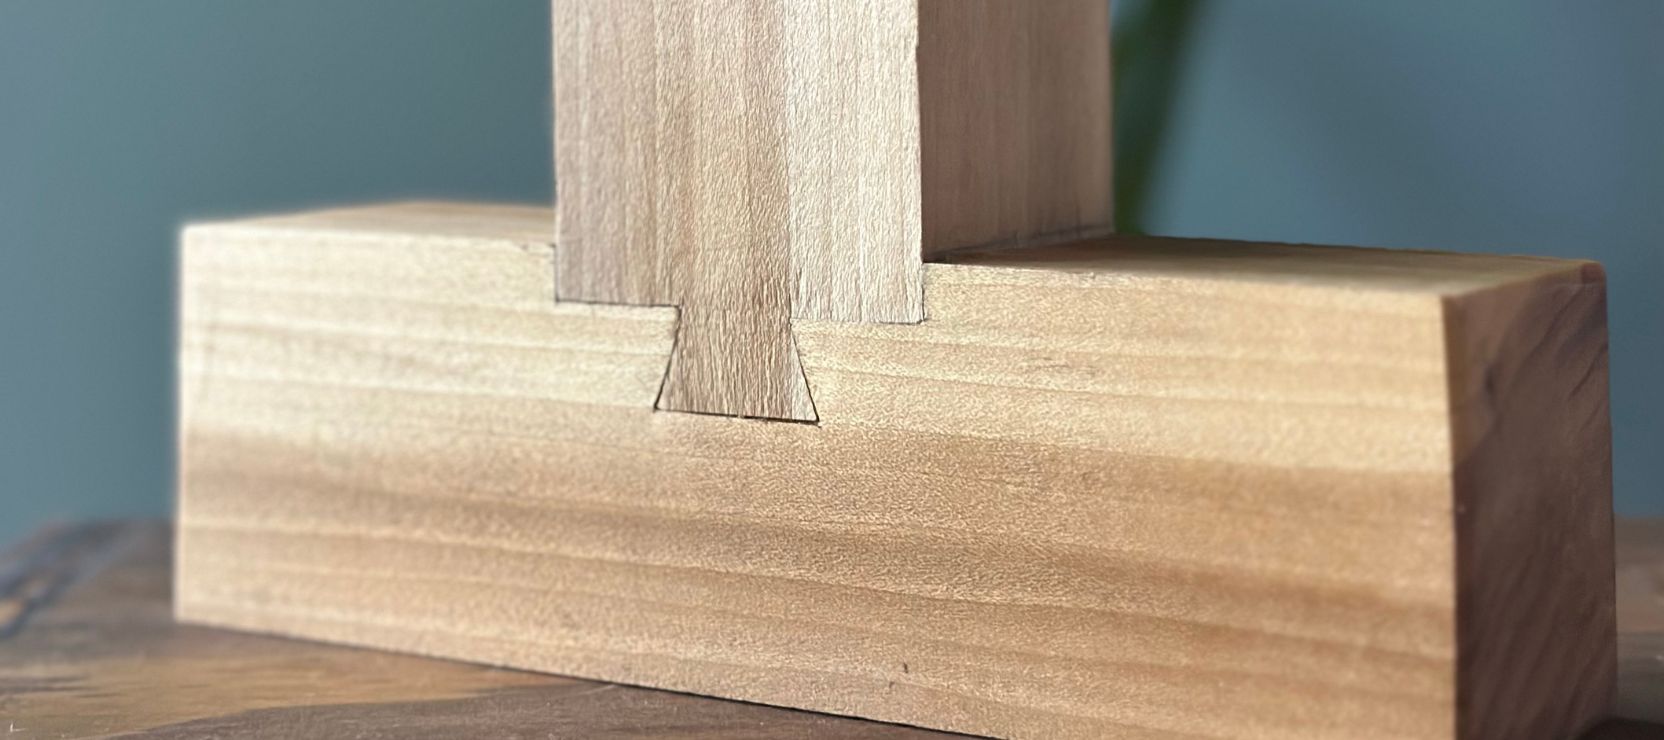 Intro To Japanese Joinery | Chris Giffrow